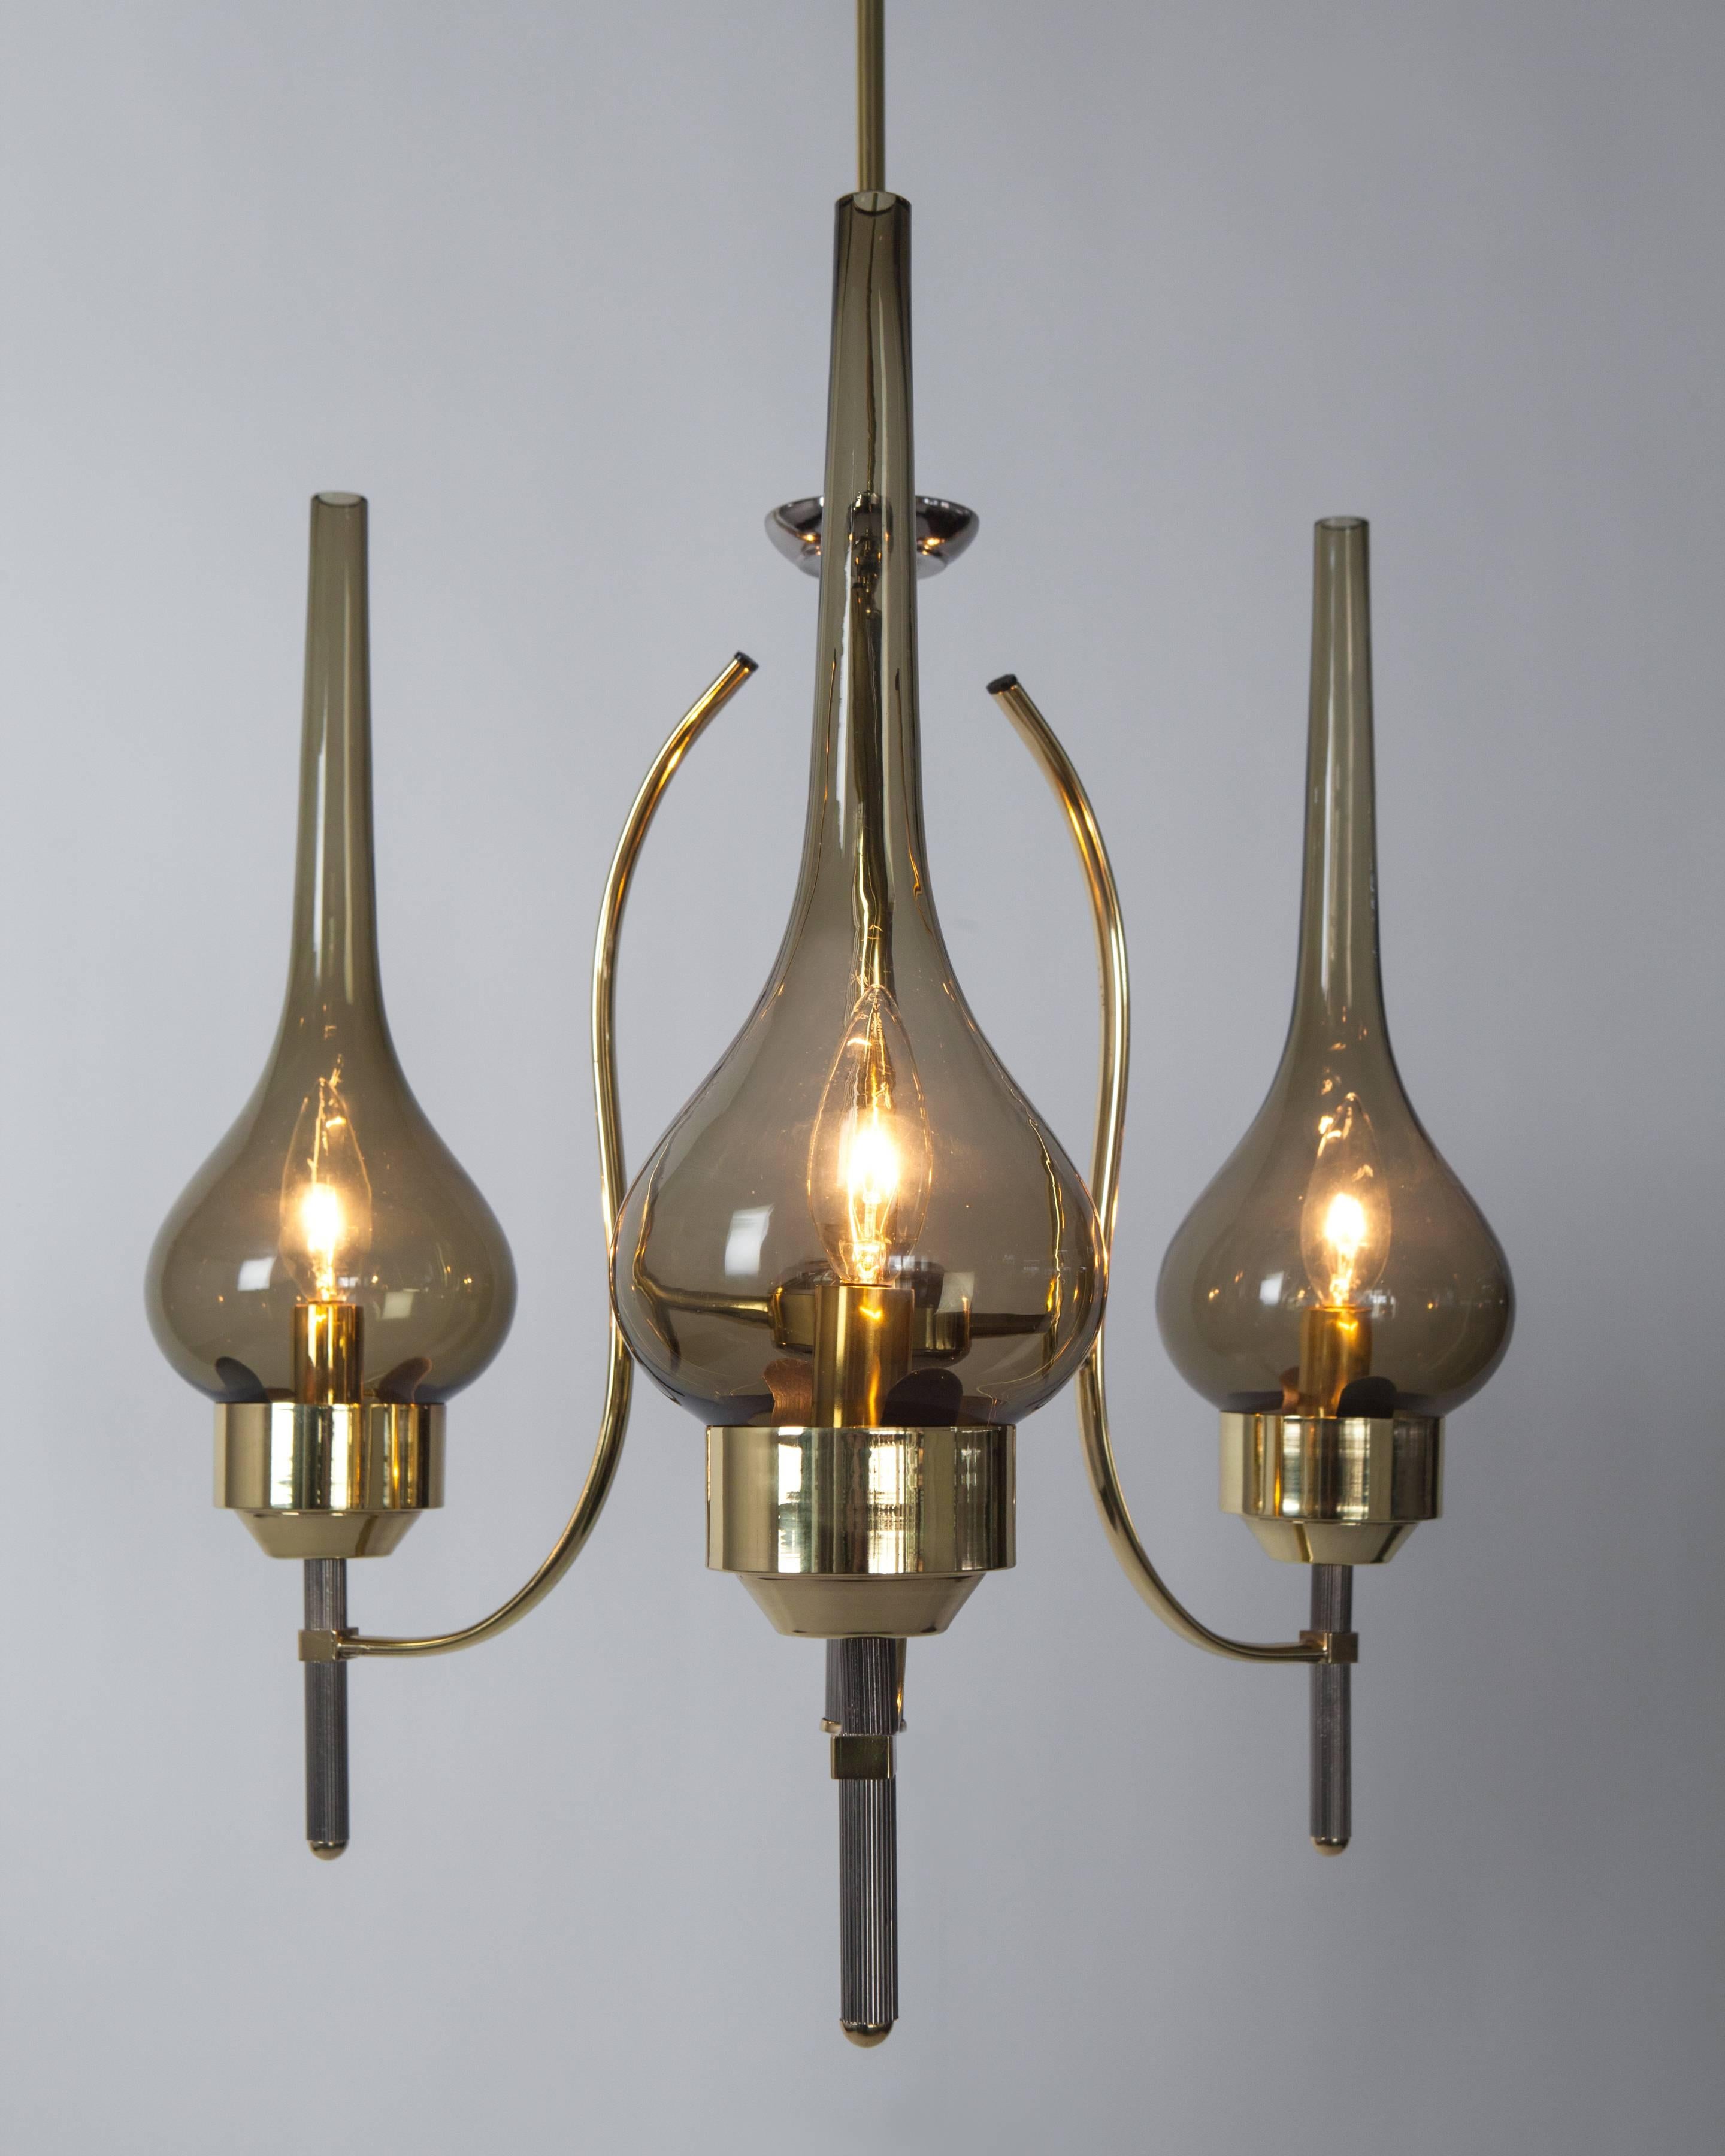 Three Arm Italian Brass & Nickel Chandelier with Smoke Glass Shades, Circa 1960s In Good Condition For Sale In New York, NY